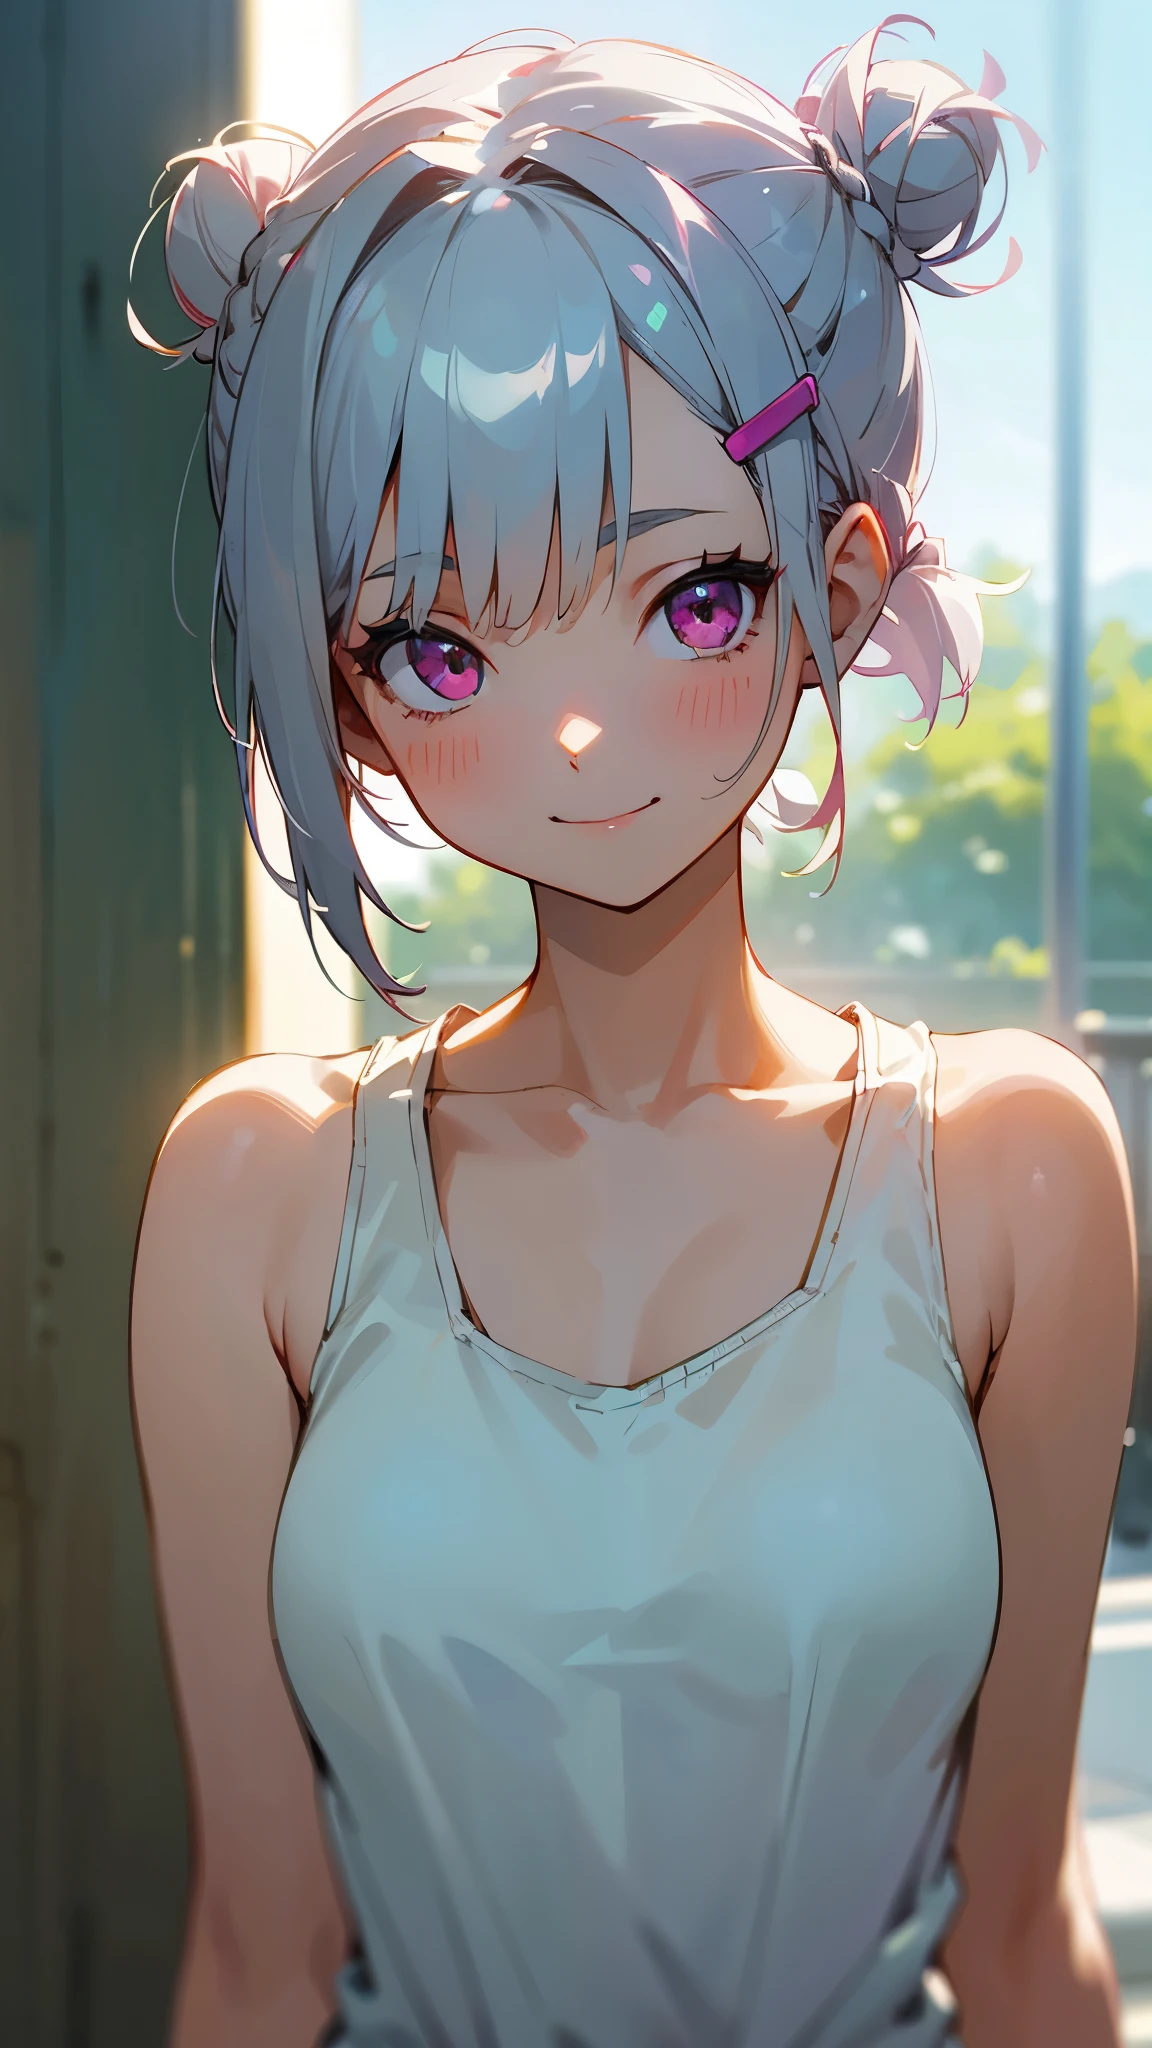 １girl、Short silver bob hair tied in a bun with a hair clip, Pink Eyes、smile、really like、Tank top、Upper body close-up、Morning Cafe Terrace、Background blur, Written boundary depth